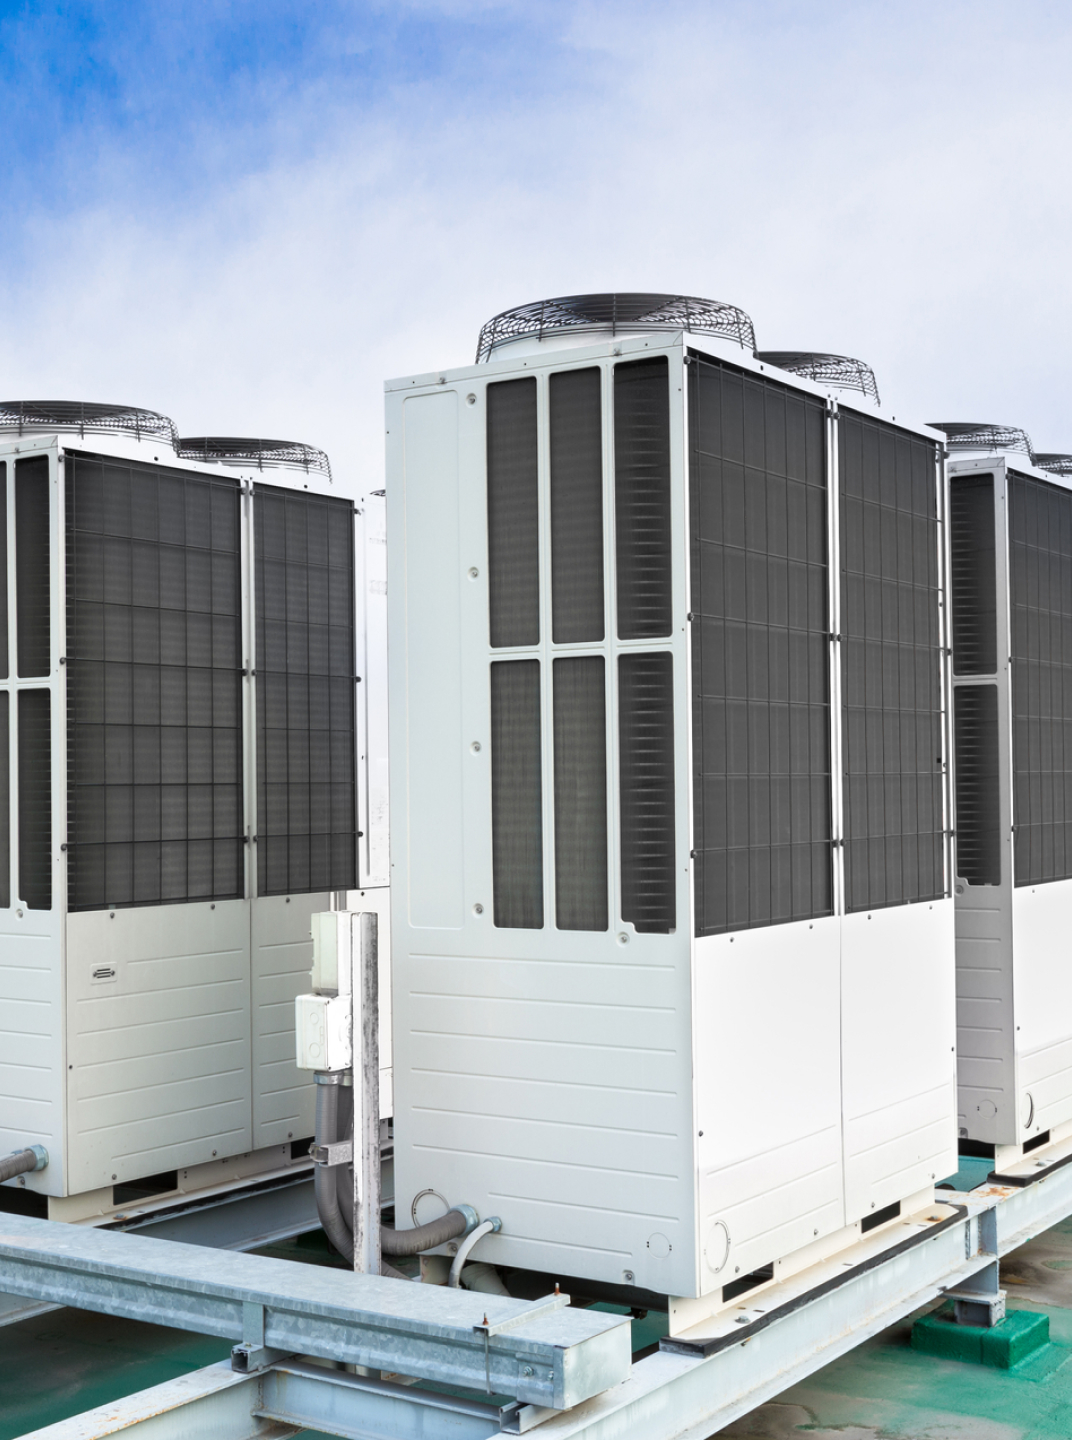 Best Residential & Commercial HVAC Services in NYC - PA Mechanical